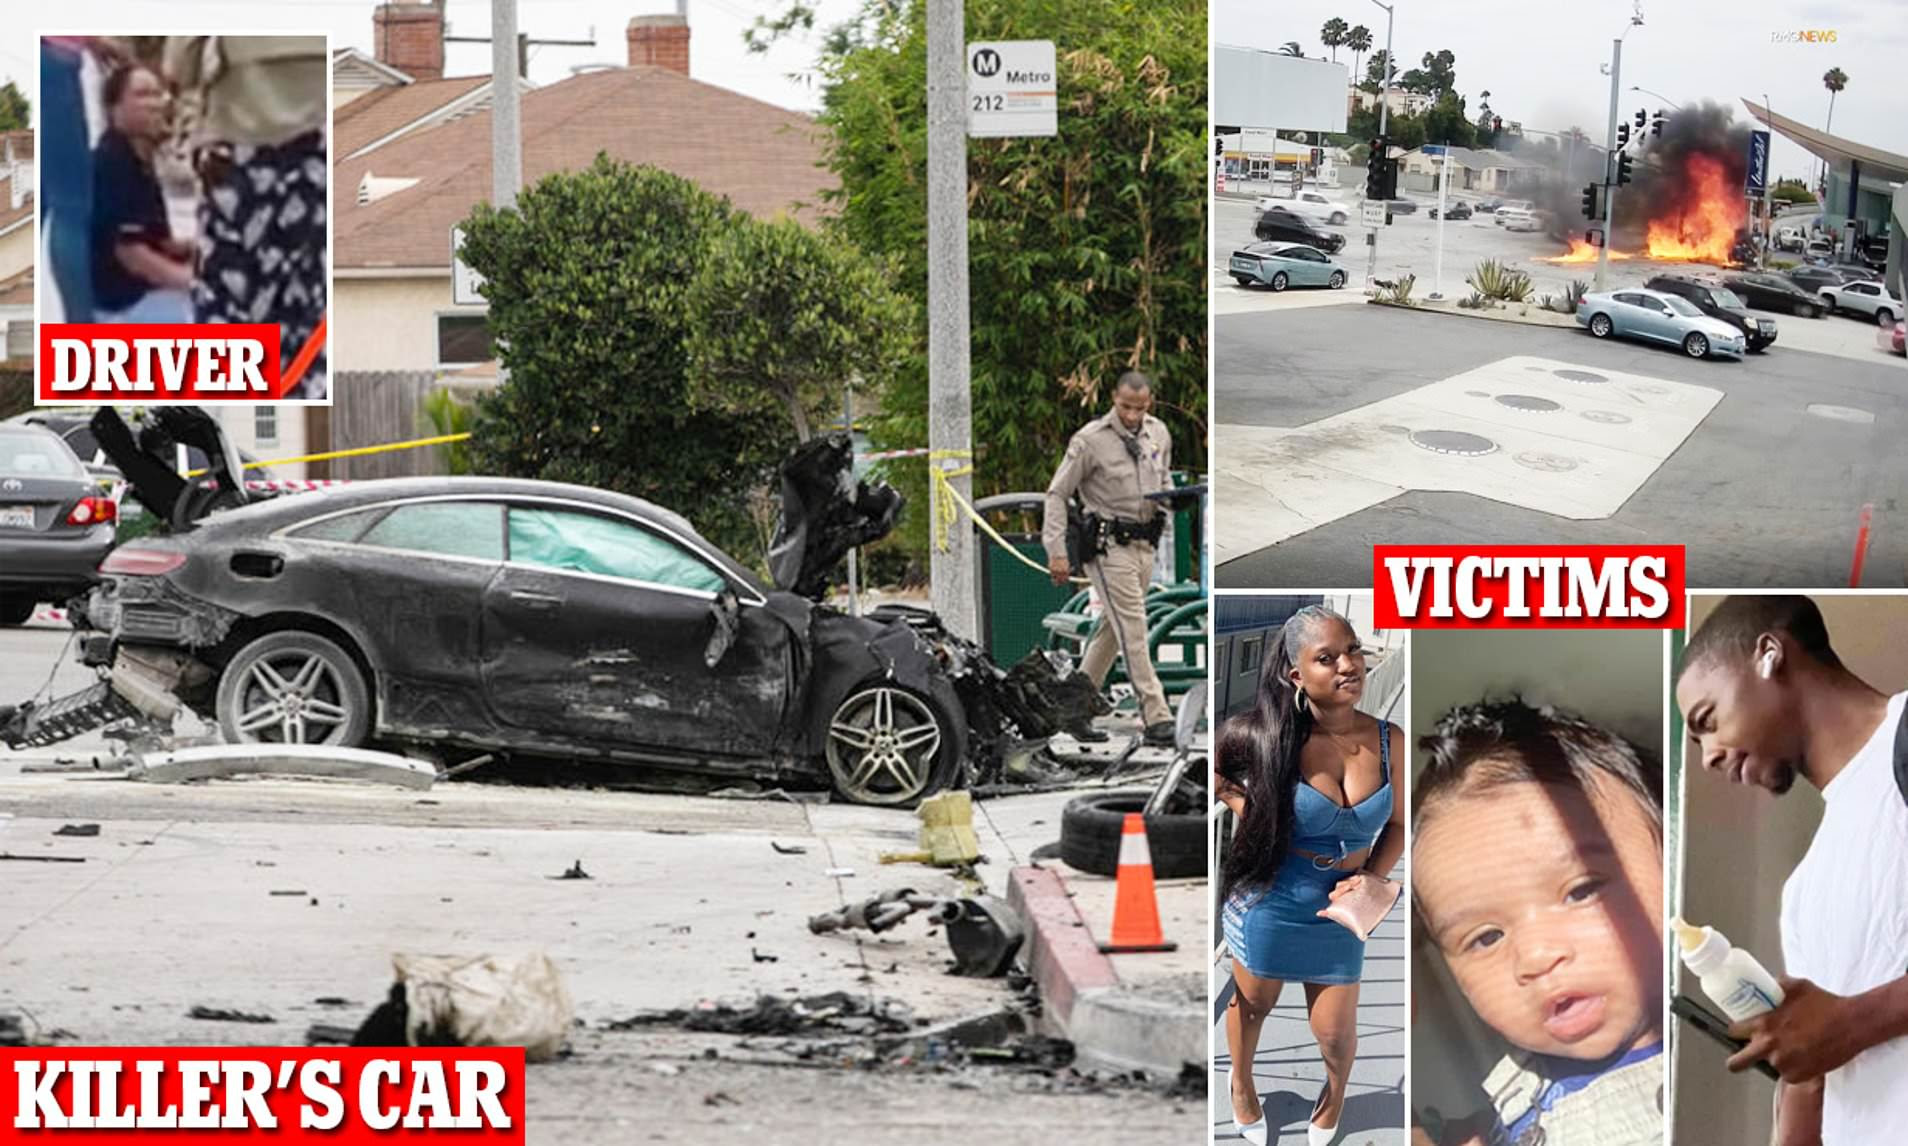 PICTURED: Mangled wreckage of Mercedes that crashed at 100mph at LA intersection killing six